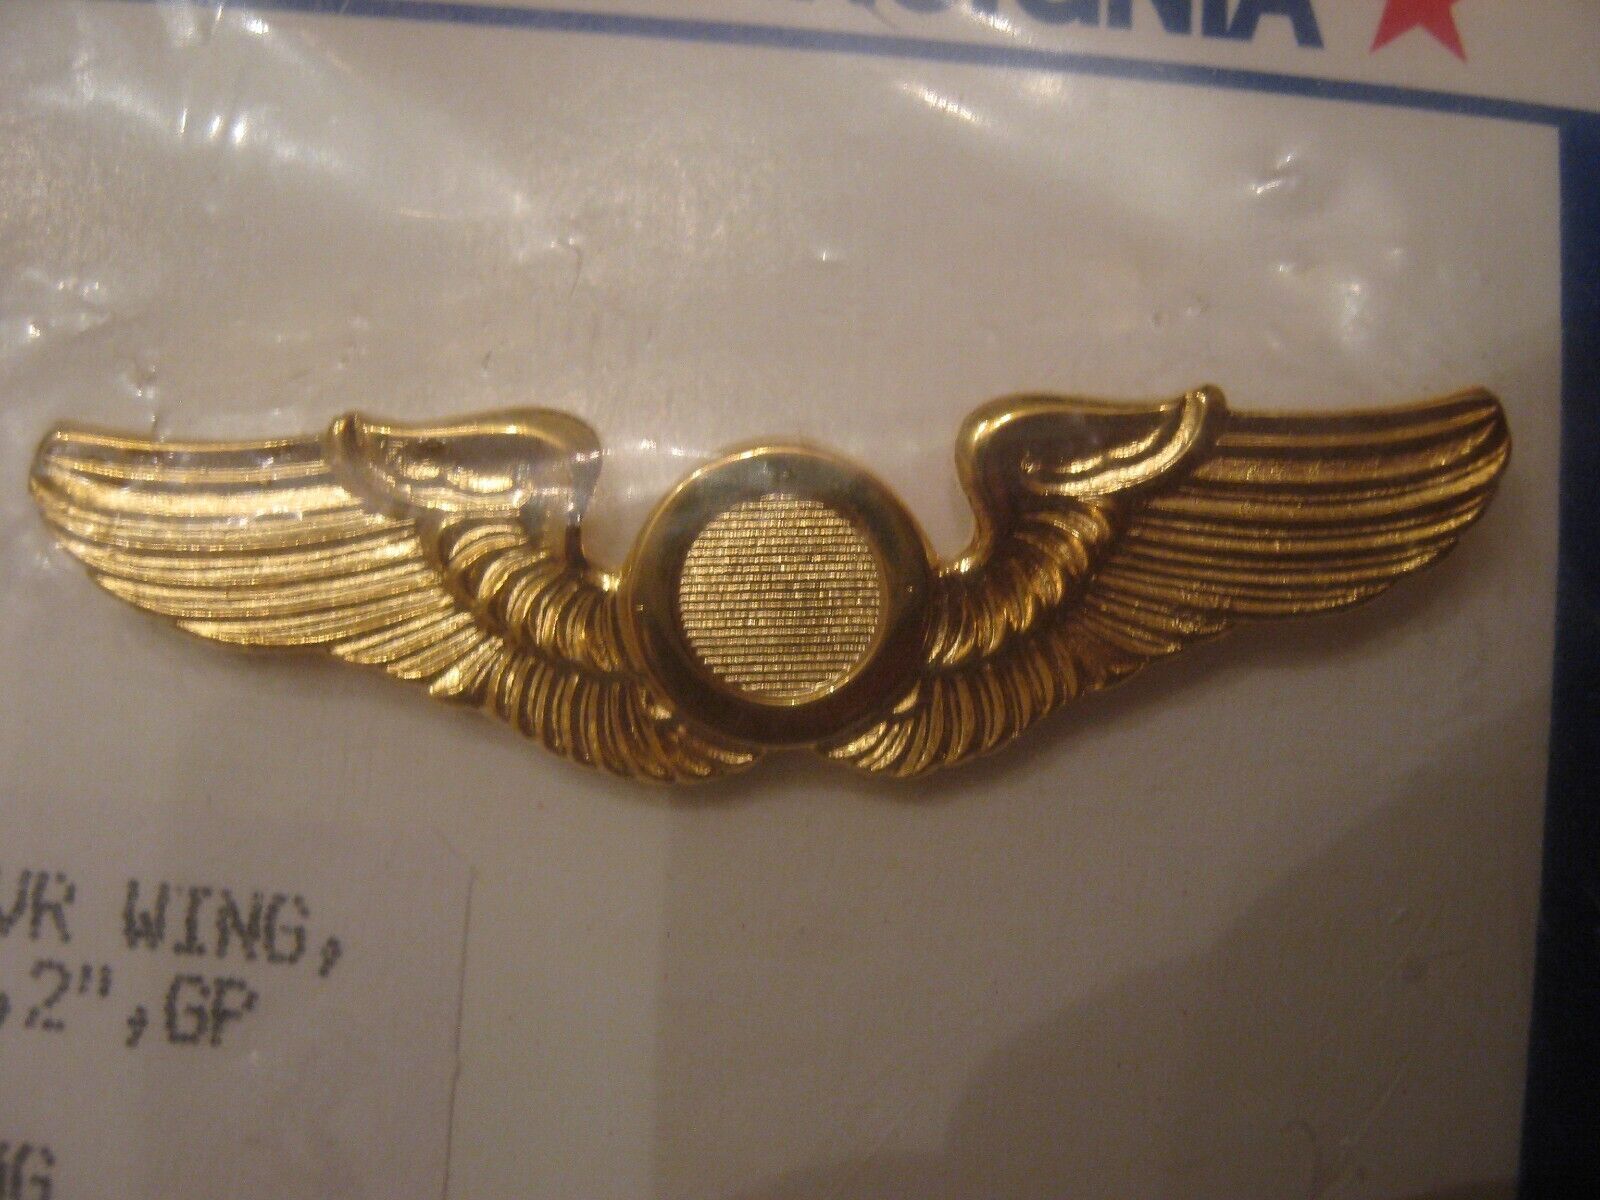 Airline Uniform Insignia Perma Shine Gold Plated Pilot Wings 2 Inches Brand-New